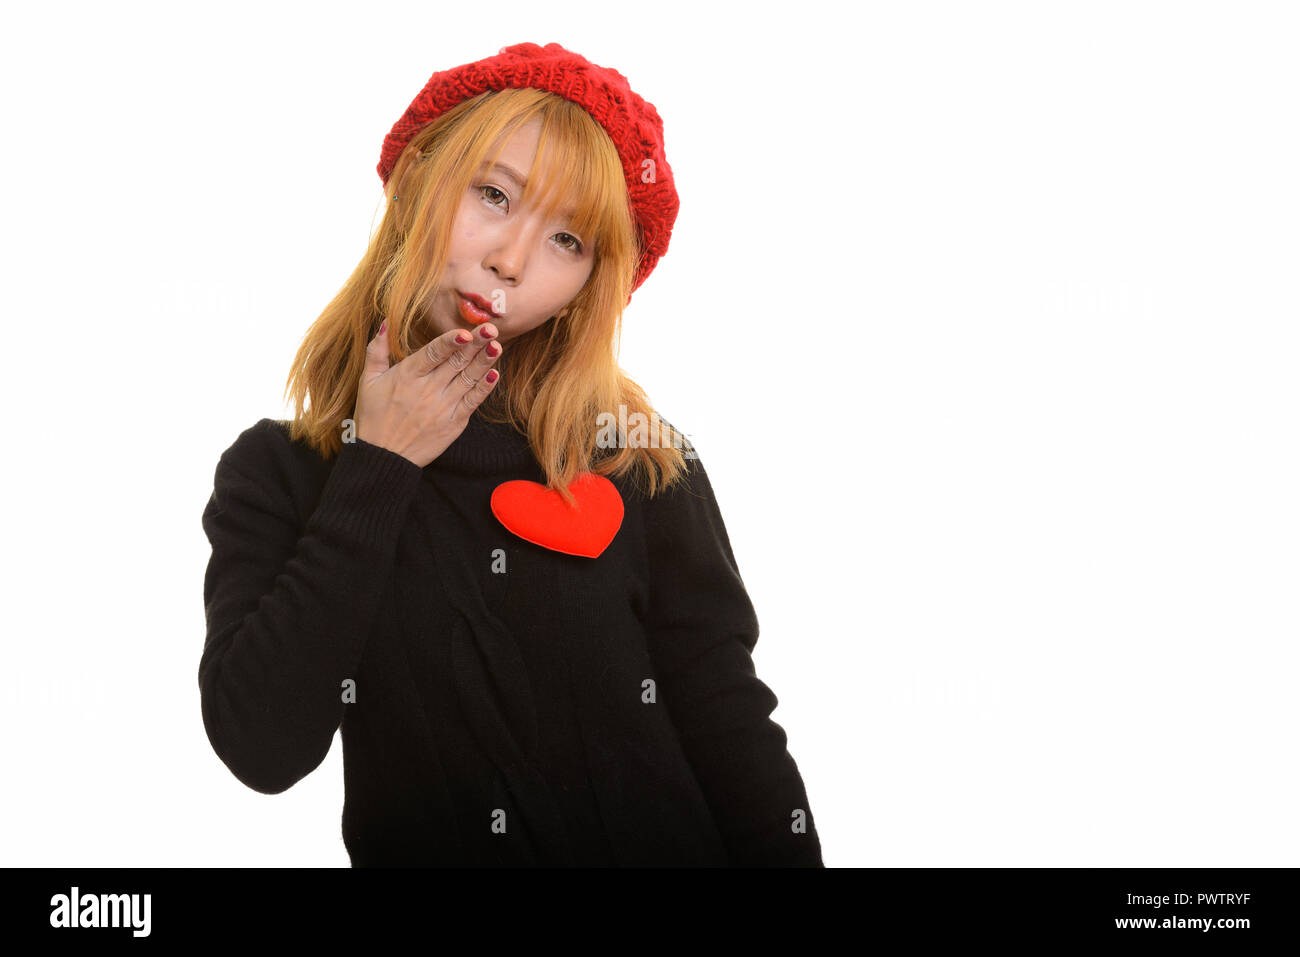 Young cute Asian woman with red heart on chest and blowing kiss Stock Photo